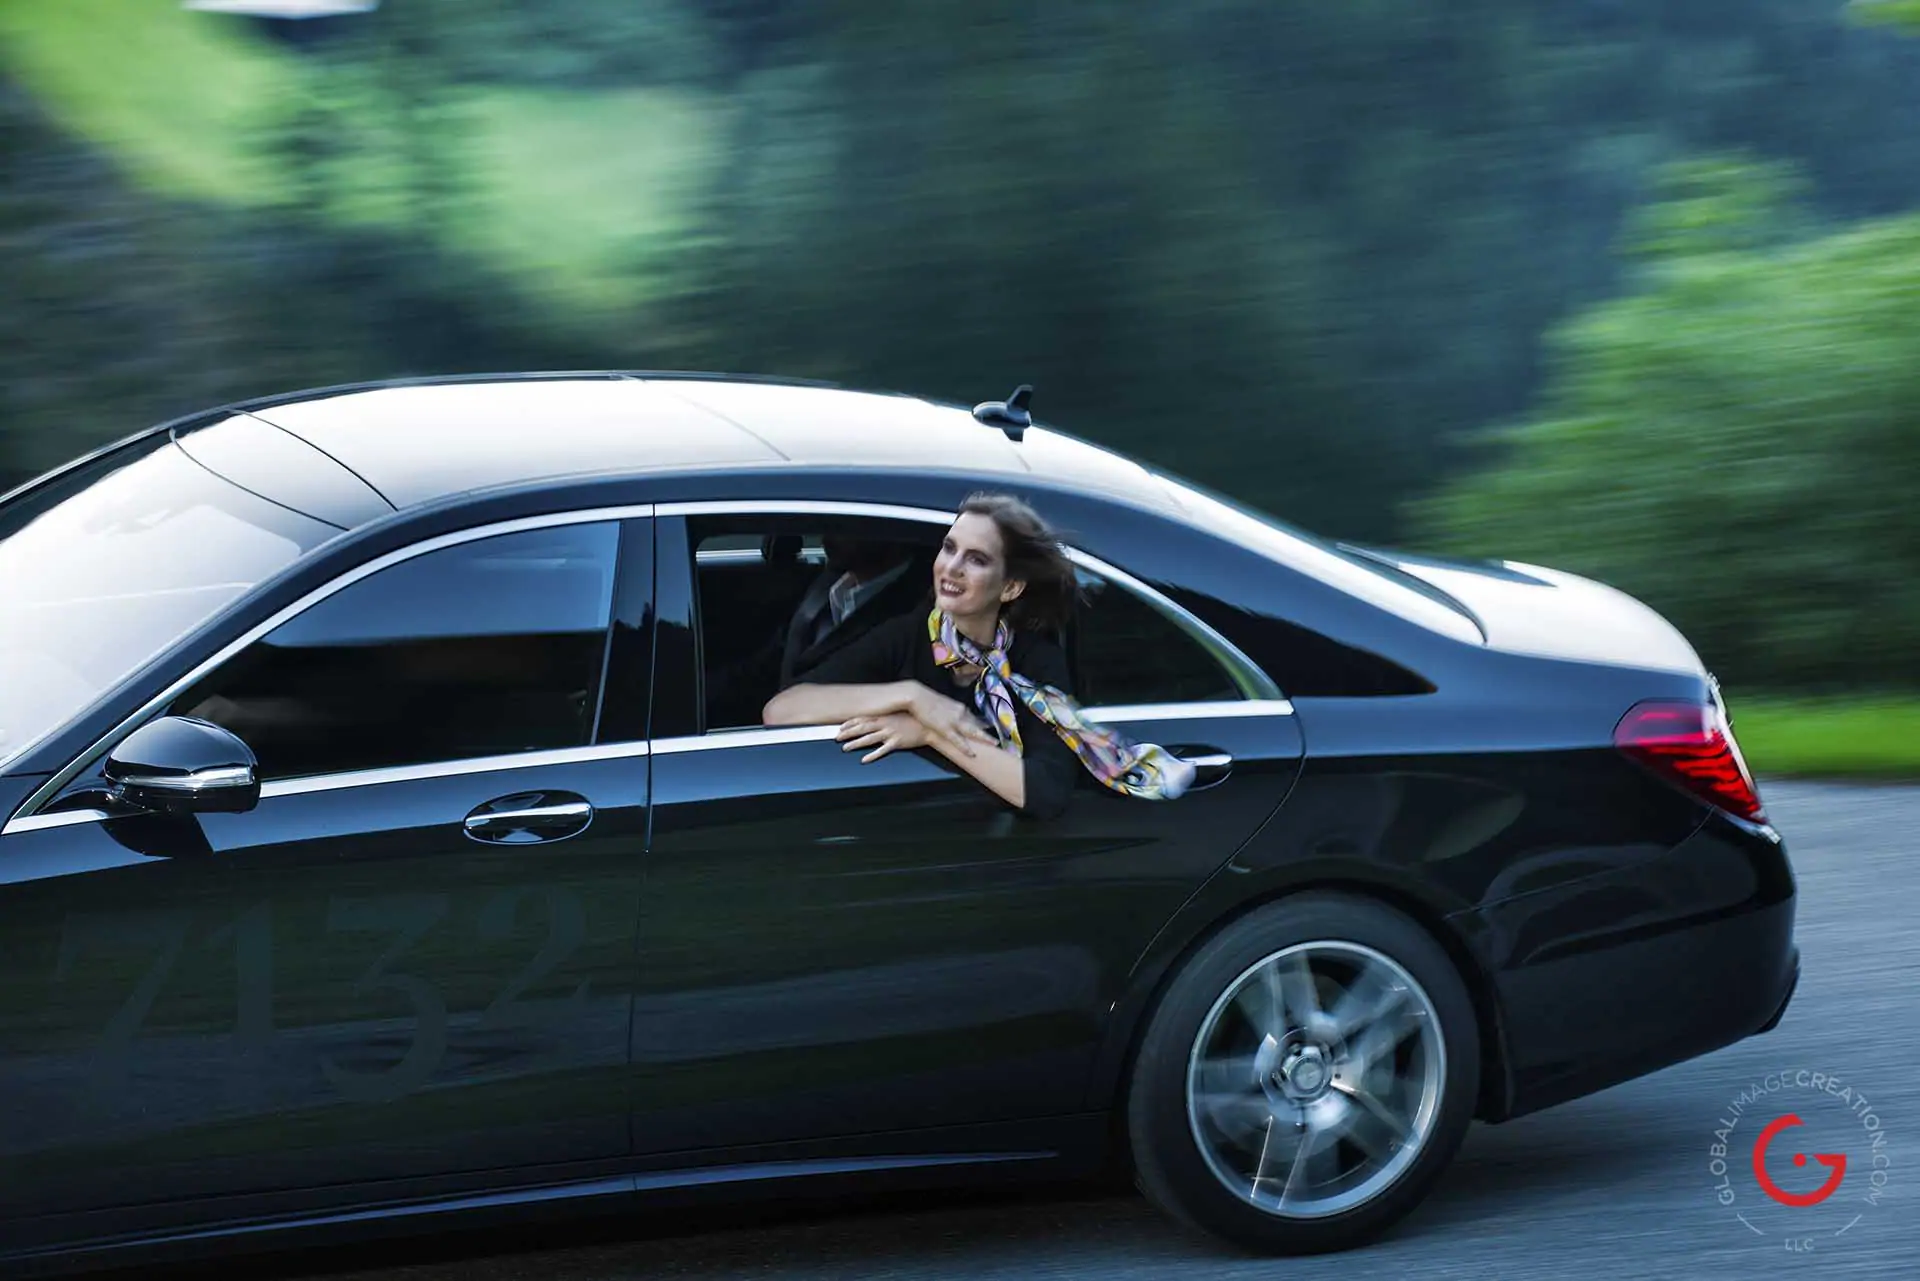 Woman enjoys the view from her limo while driving in the mountains - Photographer Lifestyle Photography Wardrobe Stylist